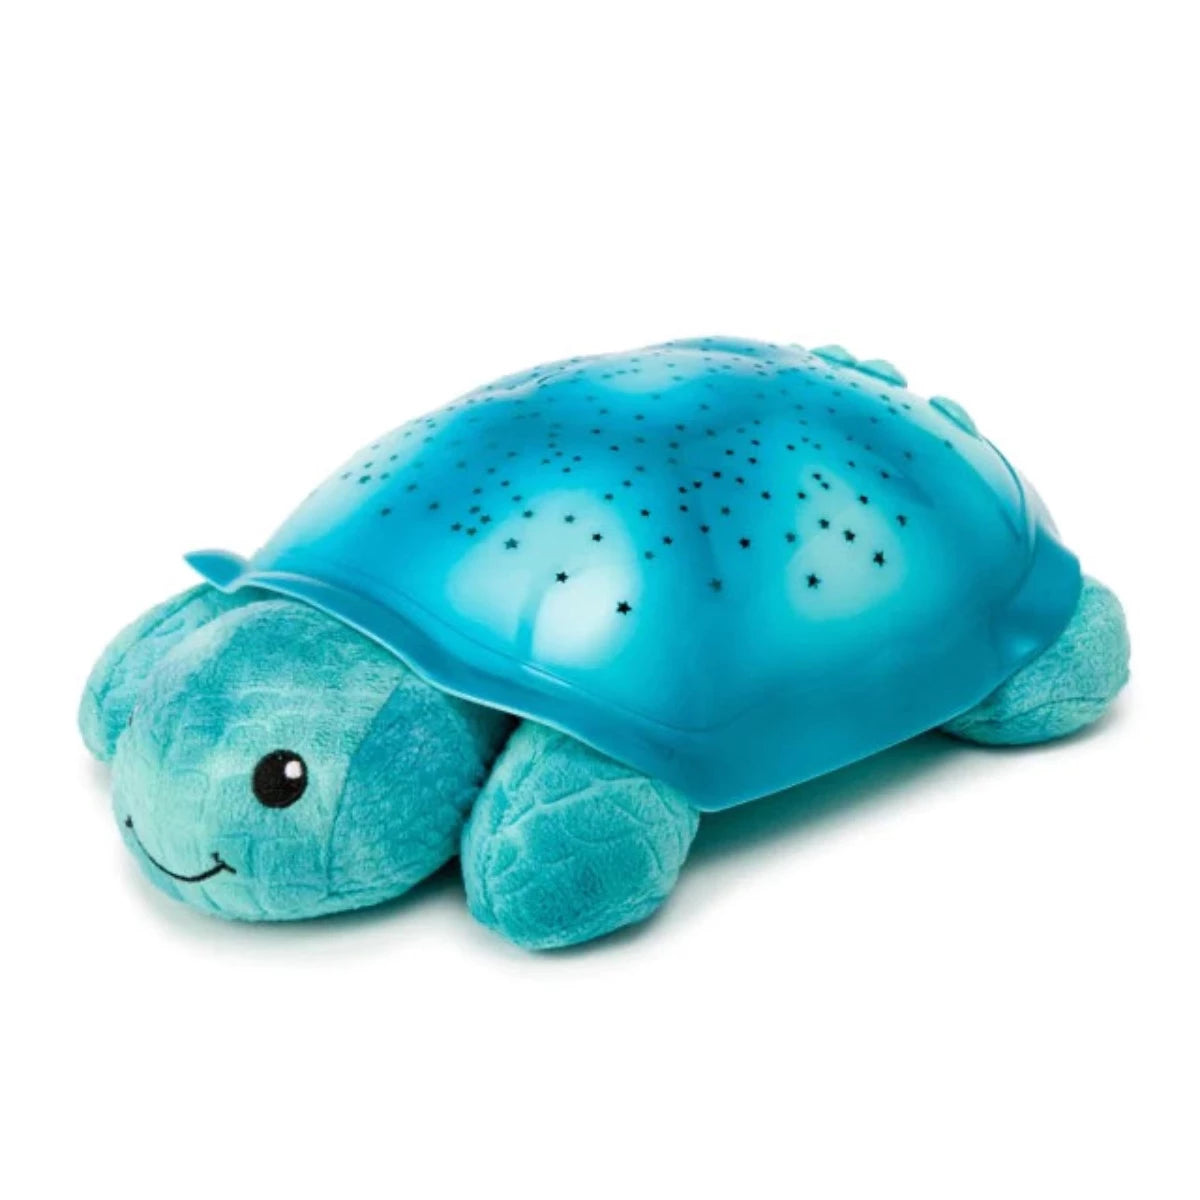 Twinkling Twilight Turtle™  - Aqua Star Projector Nightlight with Soothing Sounds cloud.b   